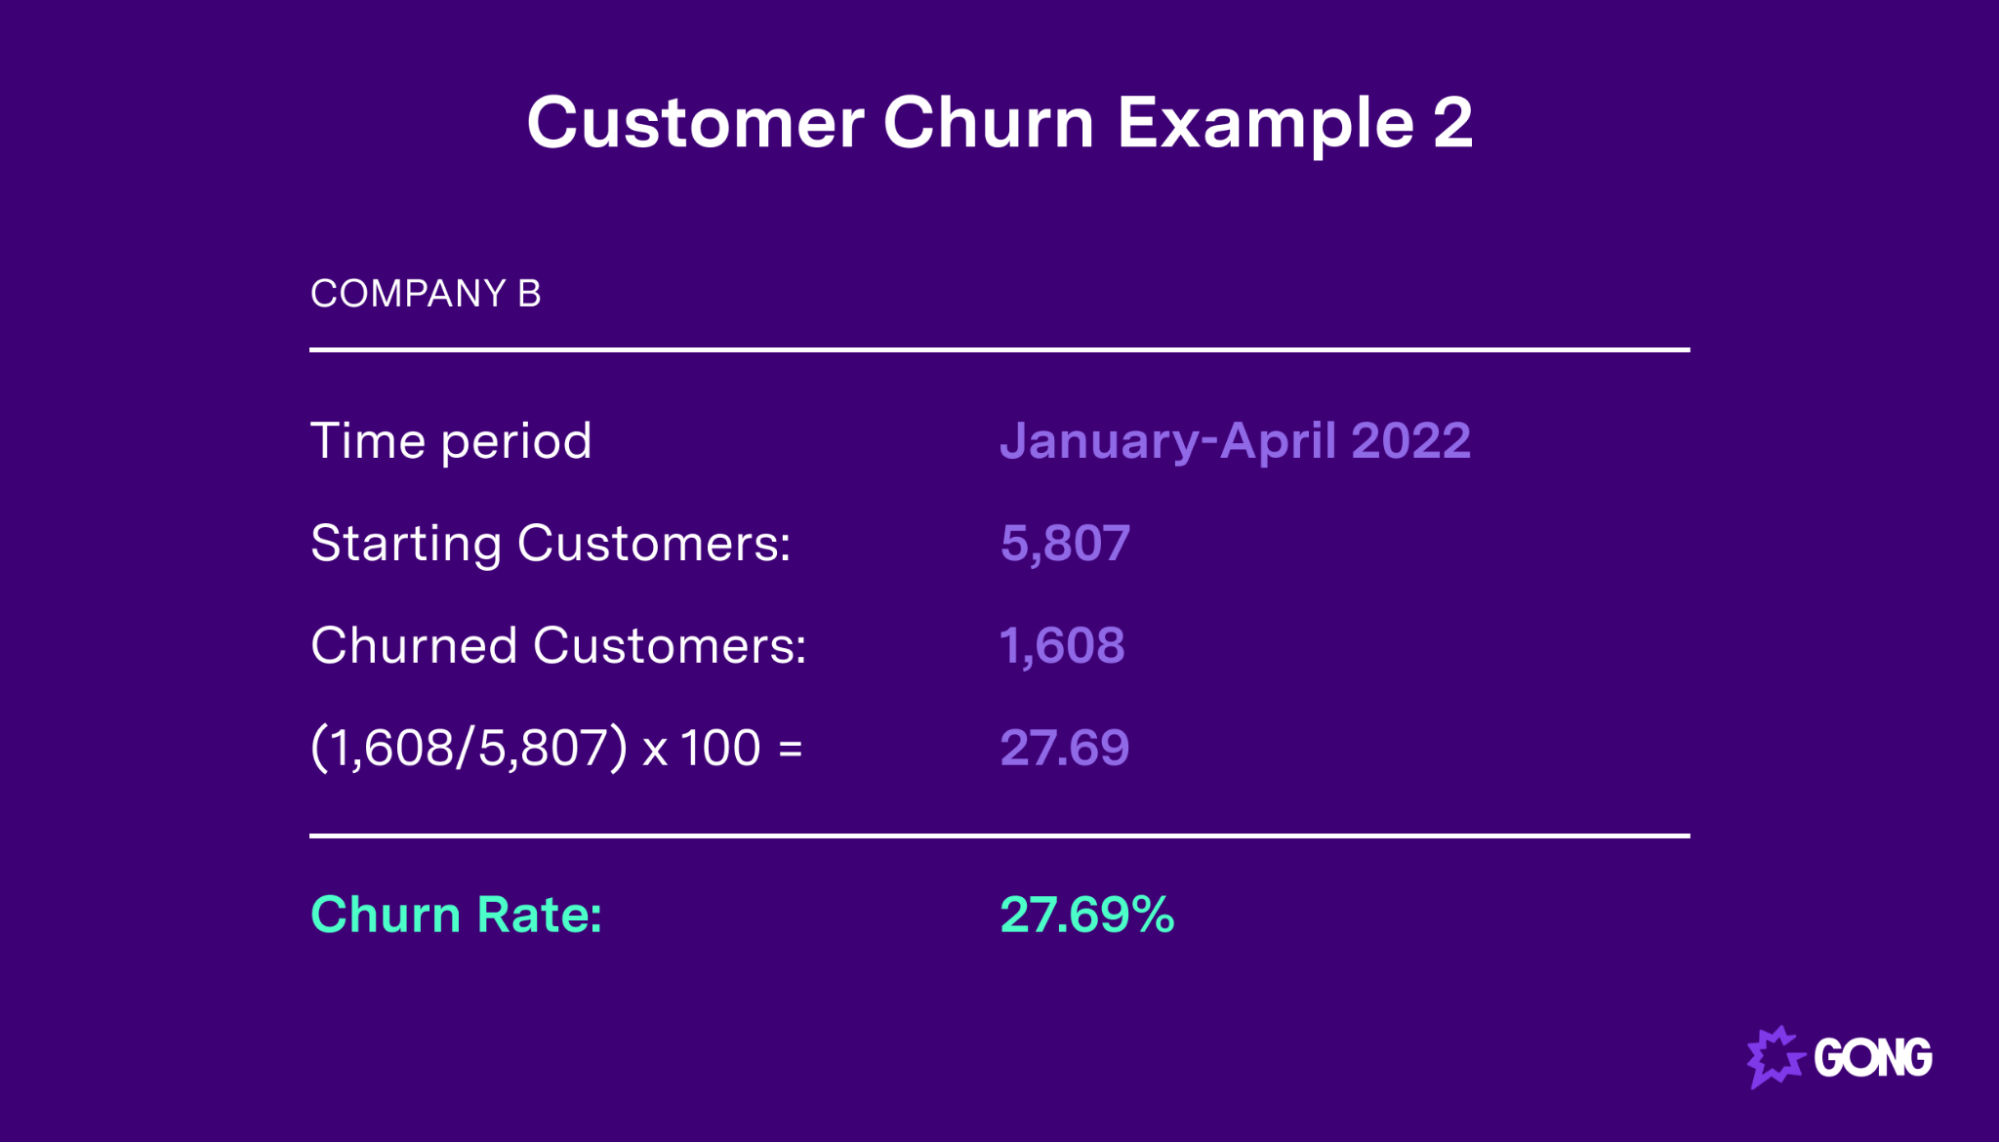 Another example of a customer churn rate